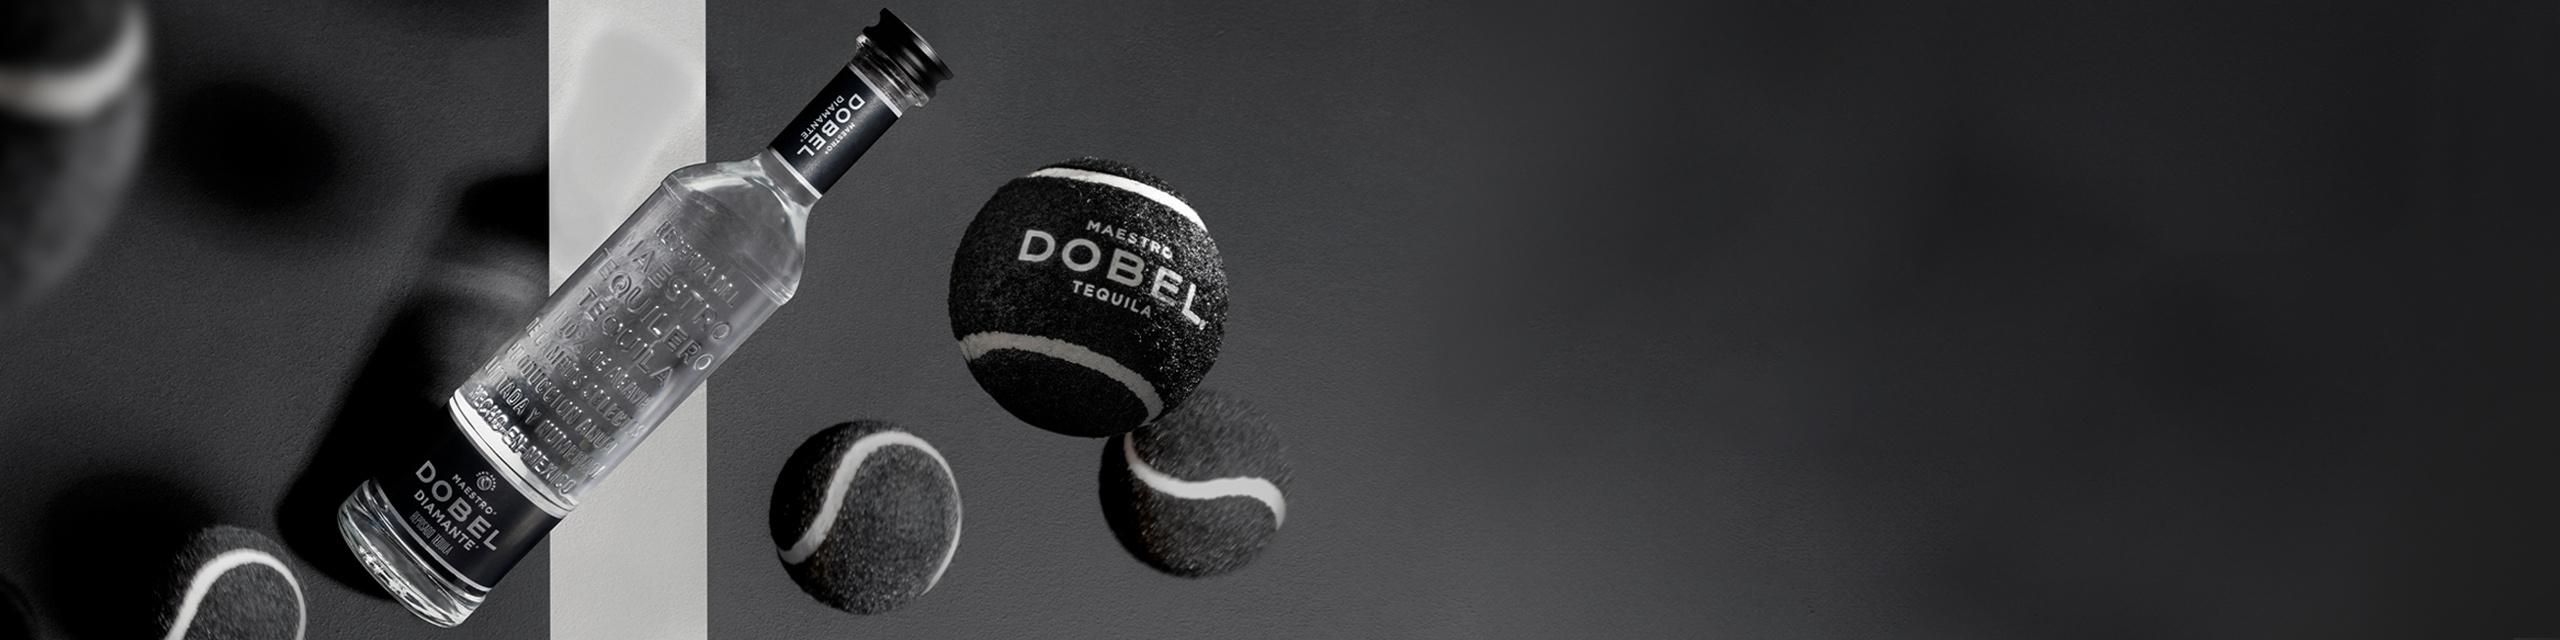 Maestro Dobel®, Mexico’s fastest growing ultra-premium tequila, is an innovative brand with a distinguished product range. It introduced the world’s 1st smoked tequila & 1st Cristalino - clear, multi-aged tequila, filtered to remove color while leaving sublime notes aqquired from aging innew European oak barrels. Dobel® tequila is 100% blue agave sourced from a single estate and crafted in the volcanic lowlands of Tequila Jalisco, Mexico. Dobel boasts Diamante, Silver, Reposado, Añejo and Humito™  varieties.
•  Its founder, an 11th generation tequila producer, oversees every step of its production.